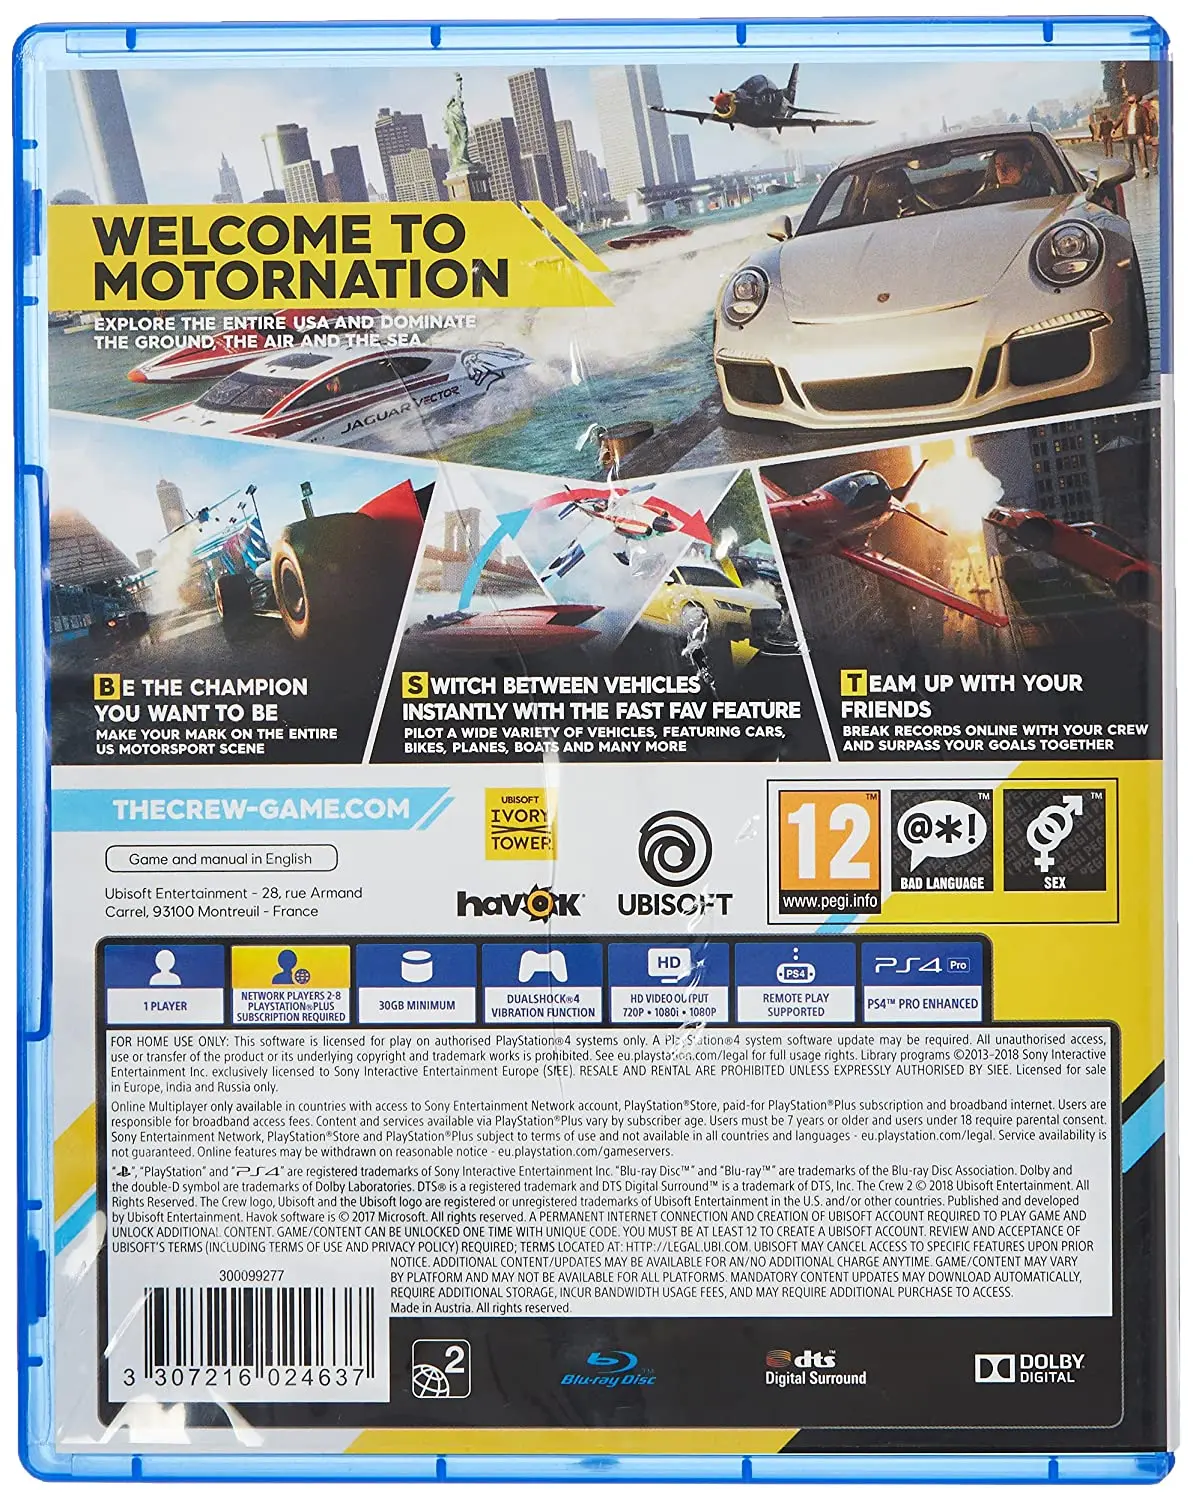 The Crew 2 - PlayStation 4